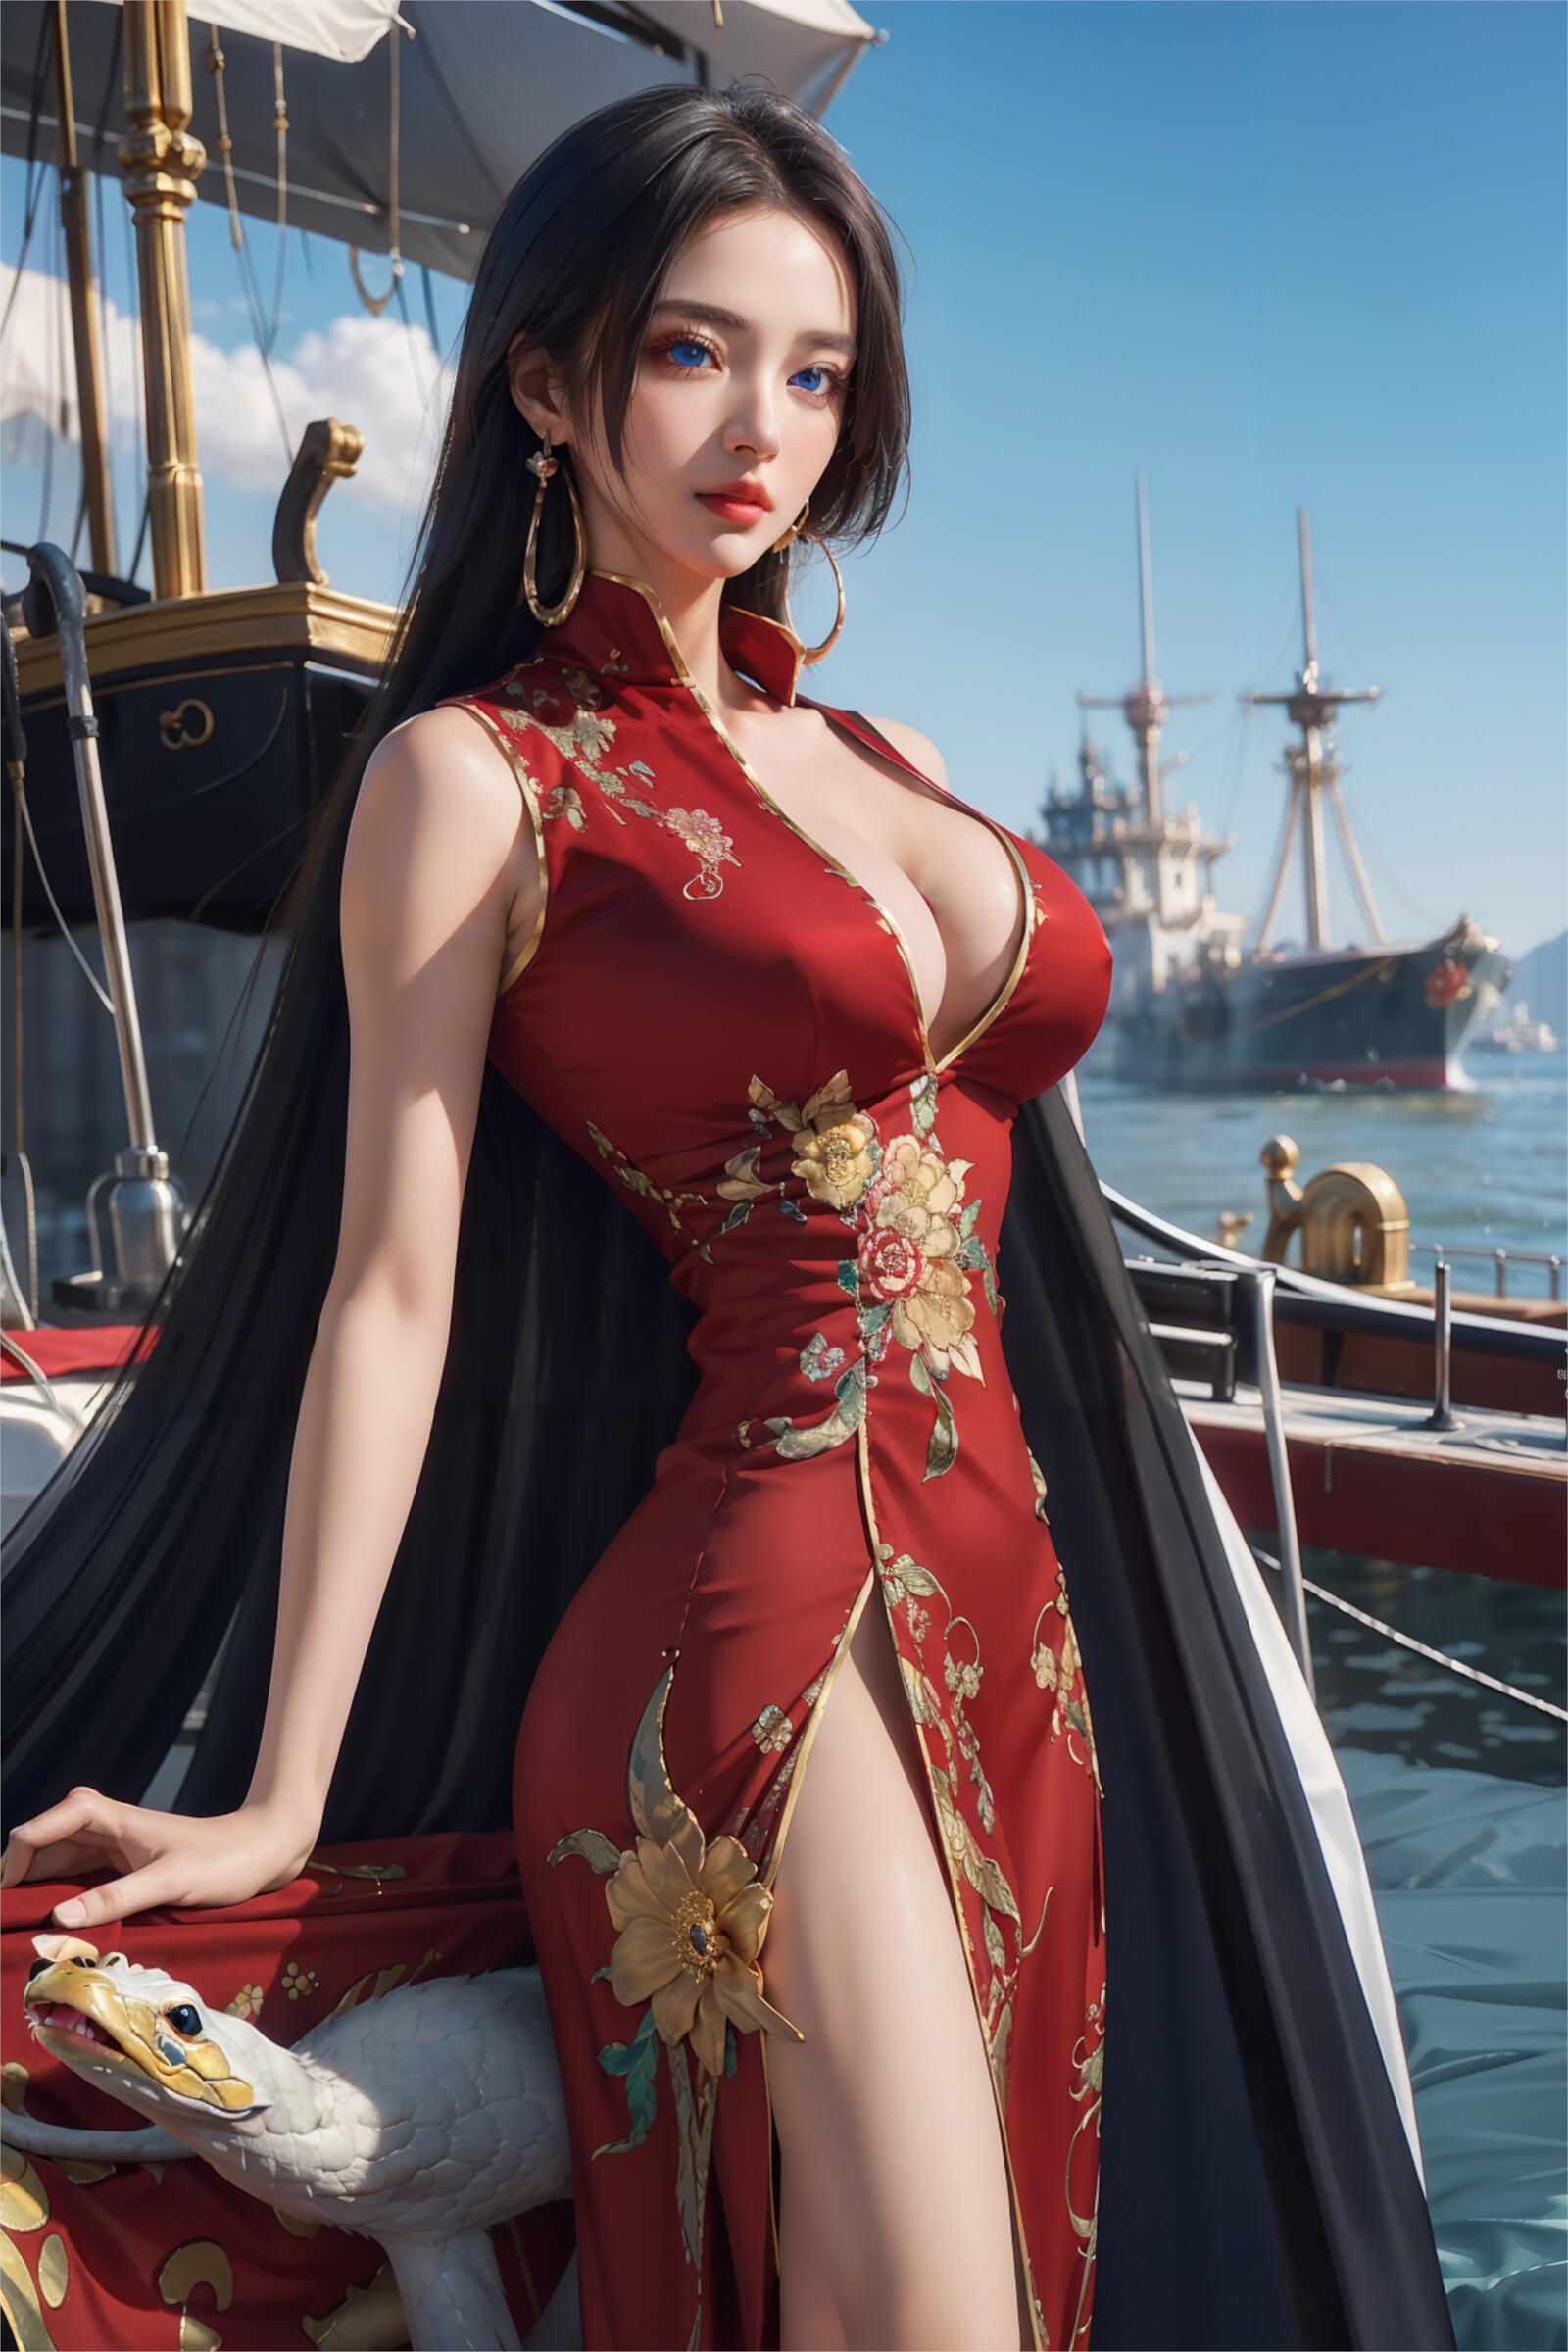 Free photo Girl pirate captain in a dress